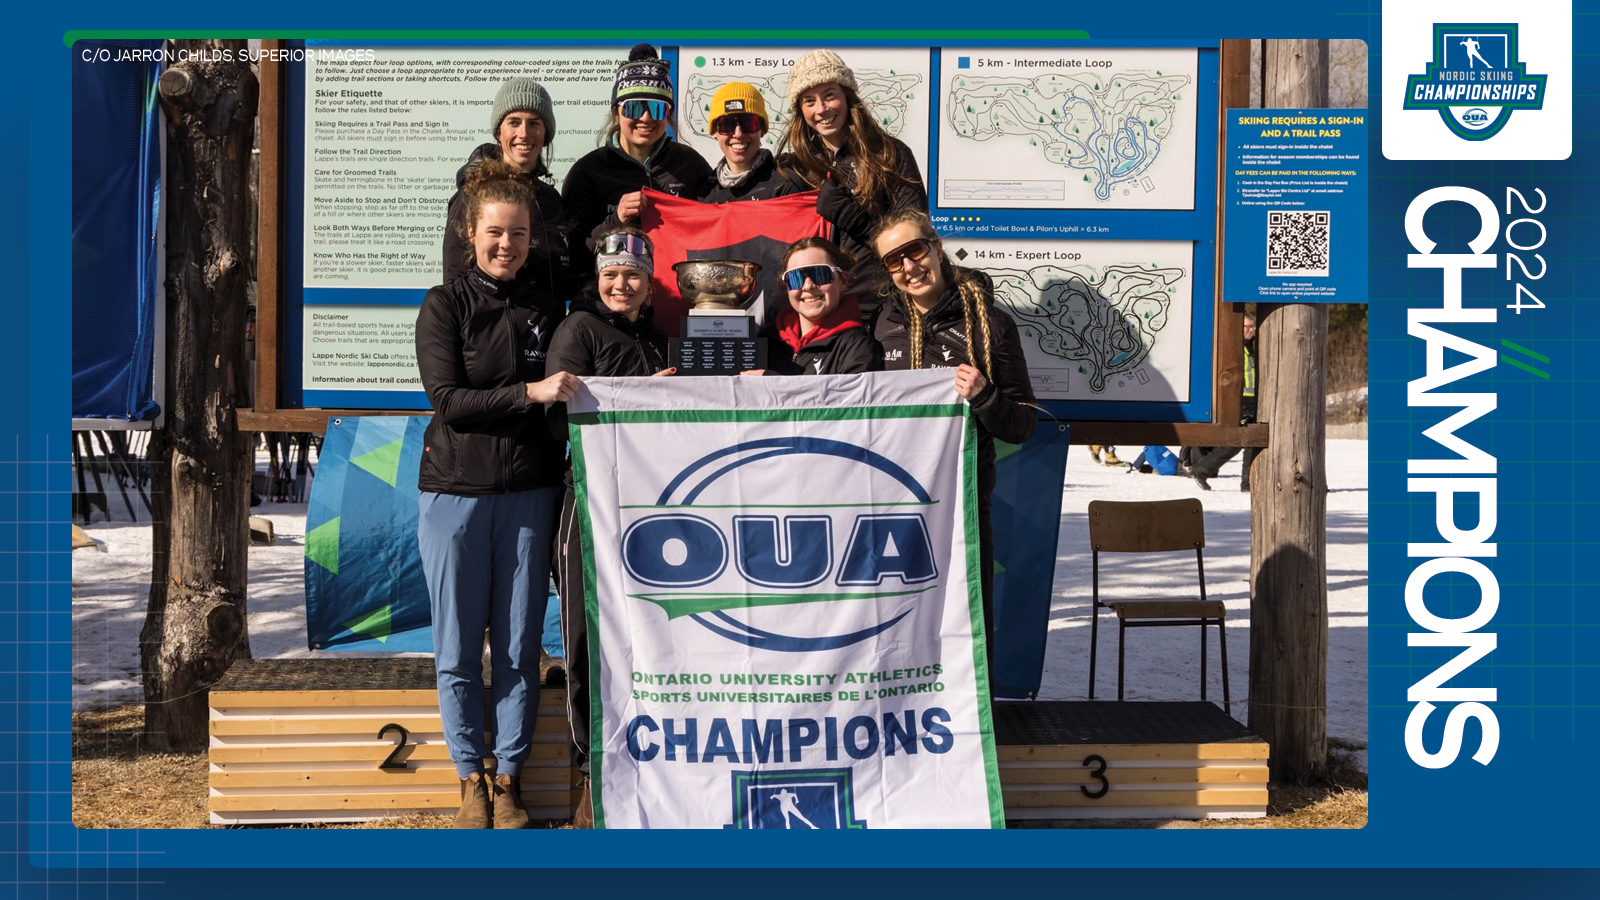 Predominantly blue graphic covered mostly by 2024 OUA Nordic Skiing Championship banner photo, with the corresponding championship logo and white text reading '2024 Champions' on the right side